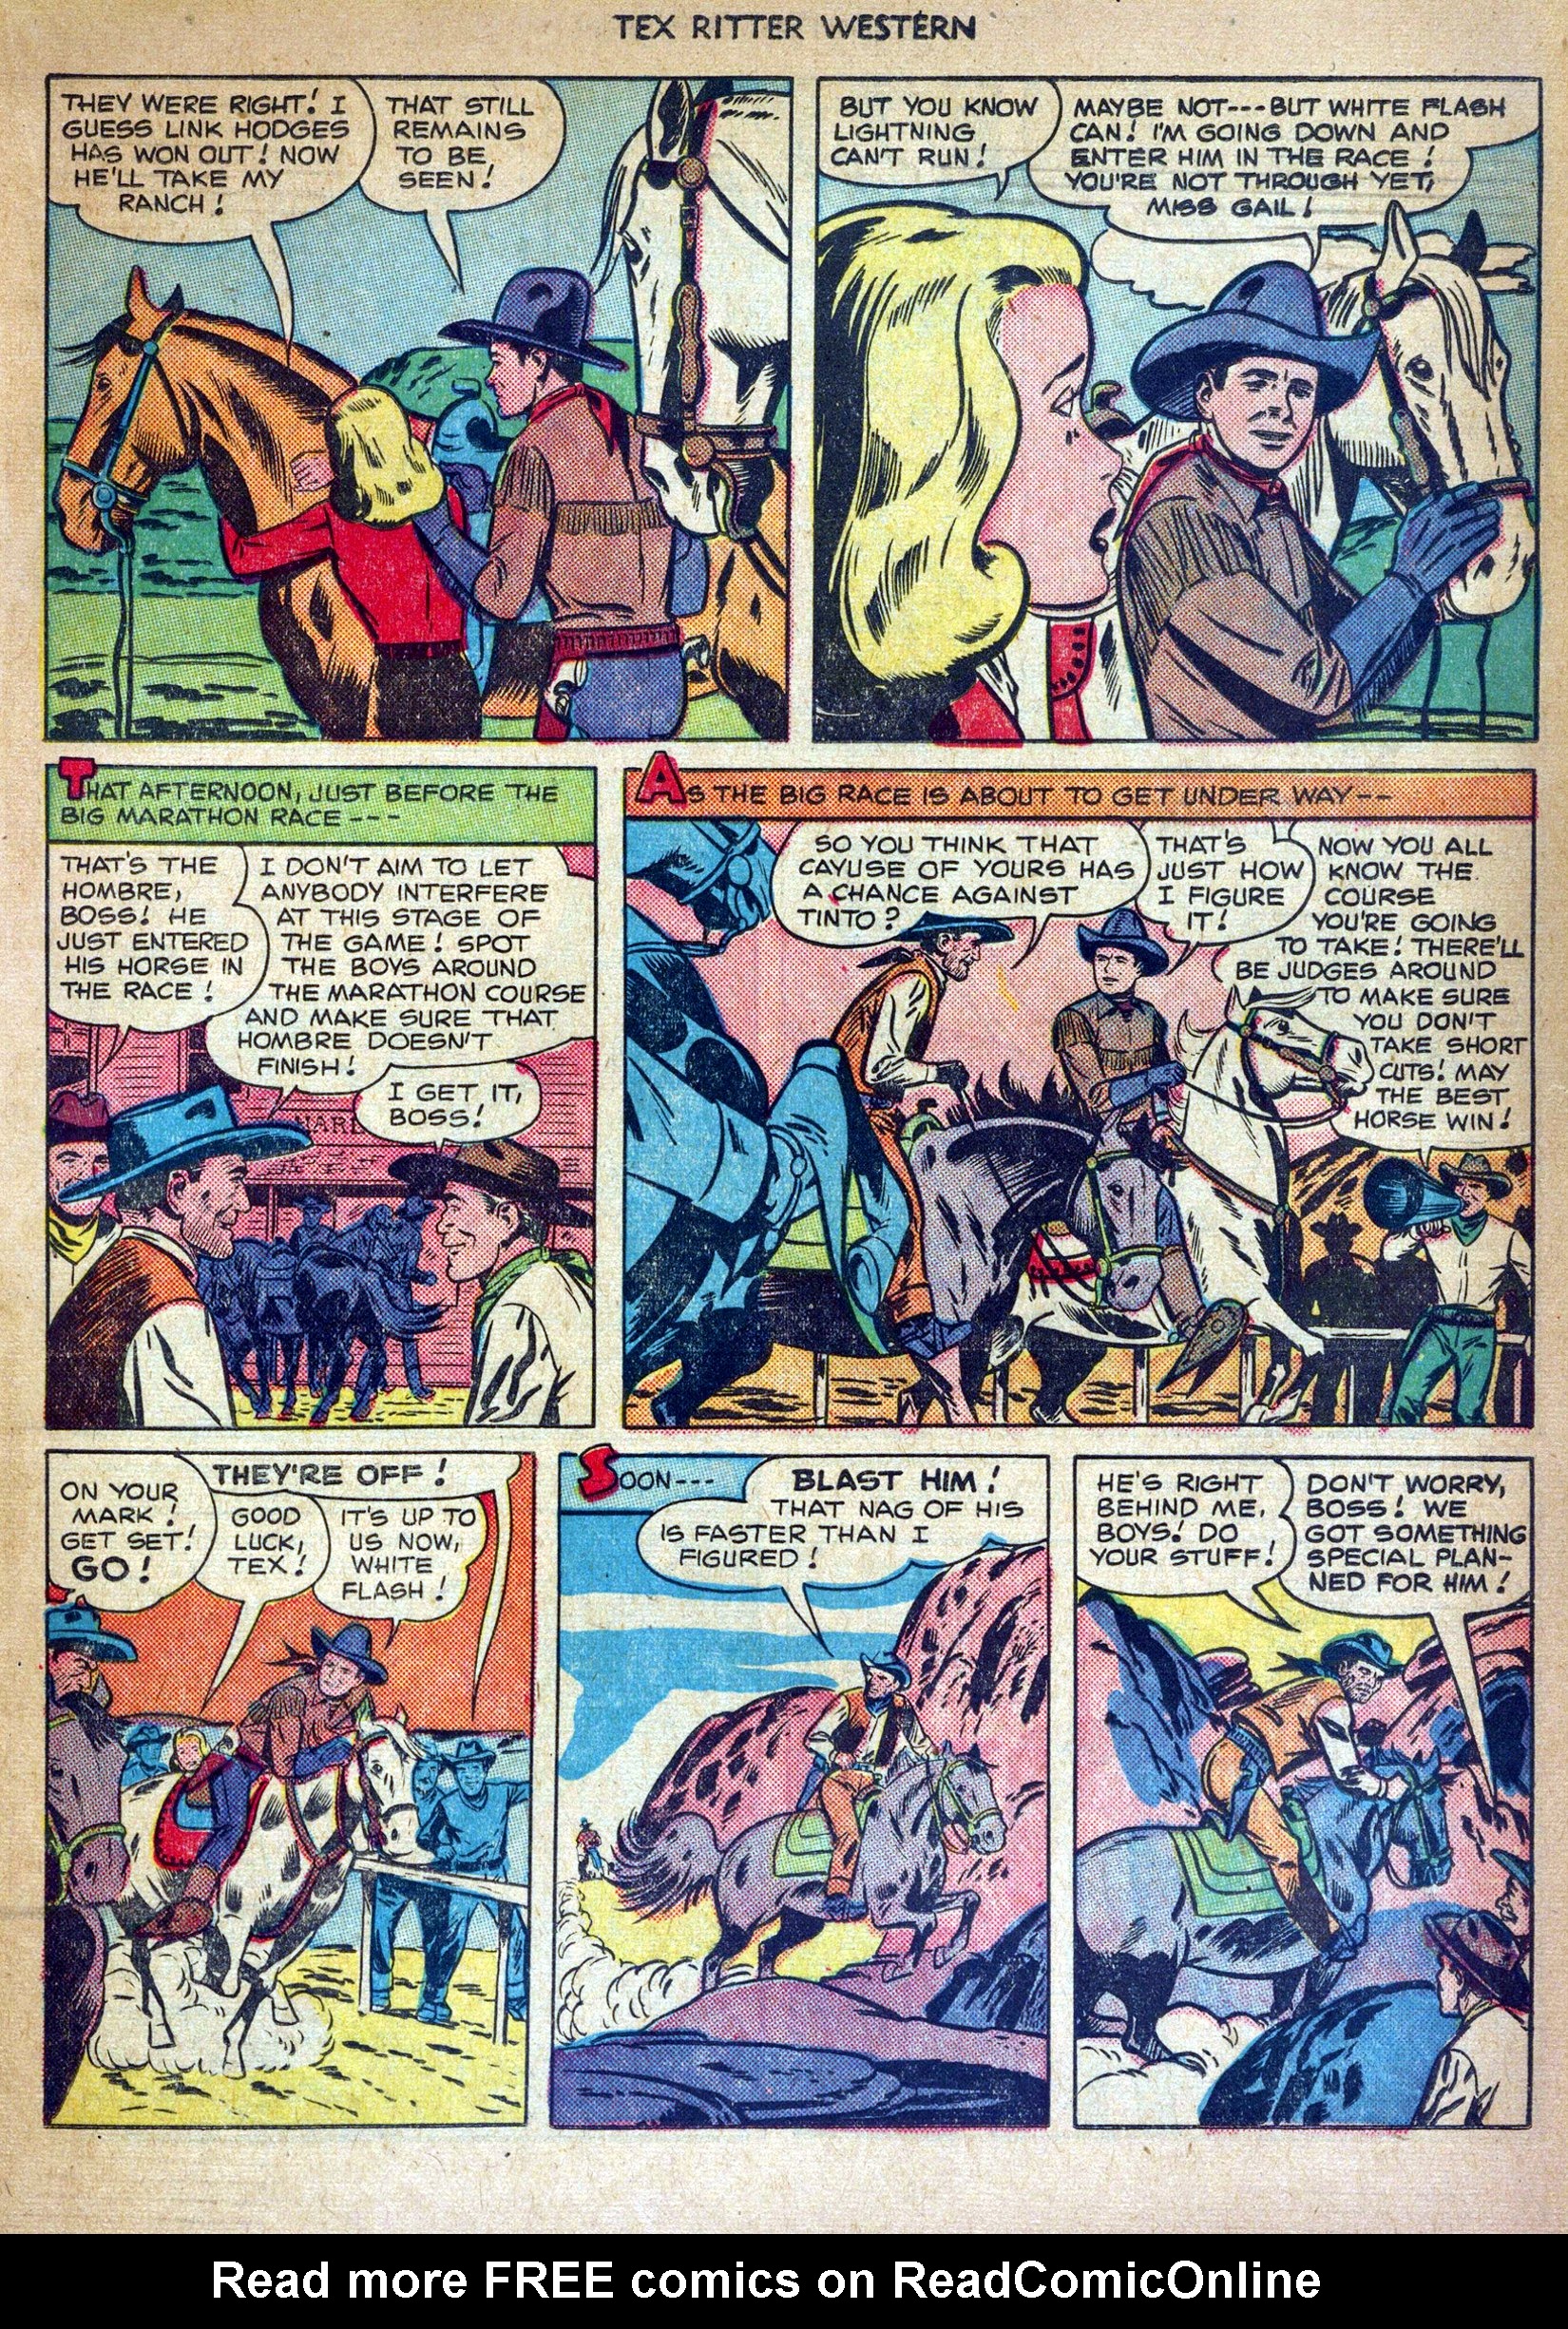 Read online Tex Ritter Western comic -  Issue #4 - 19